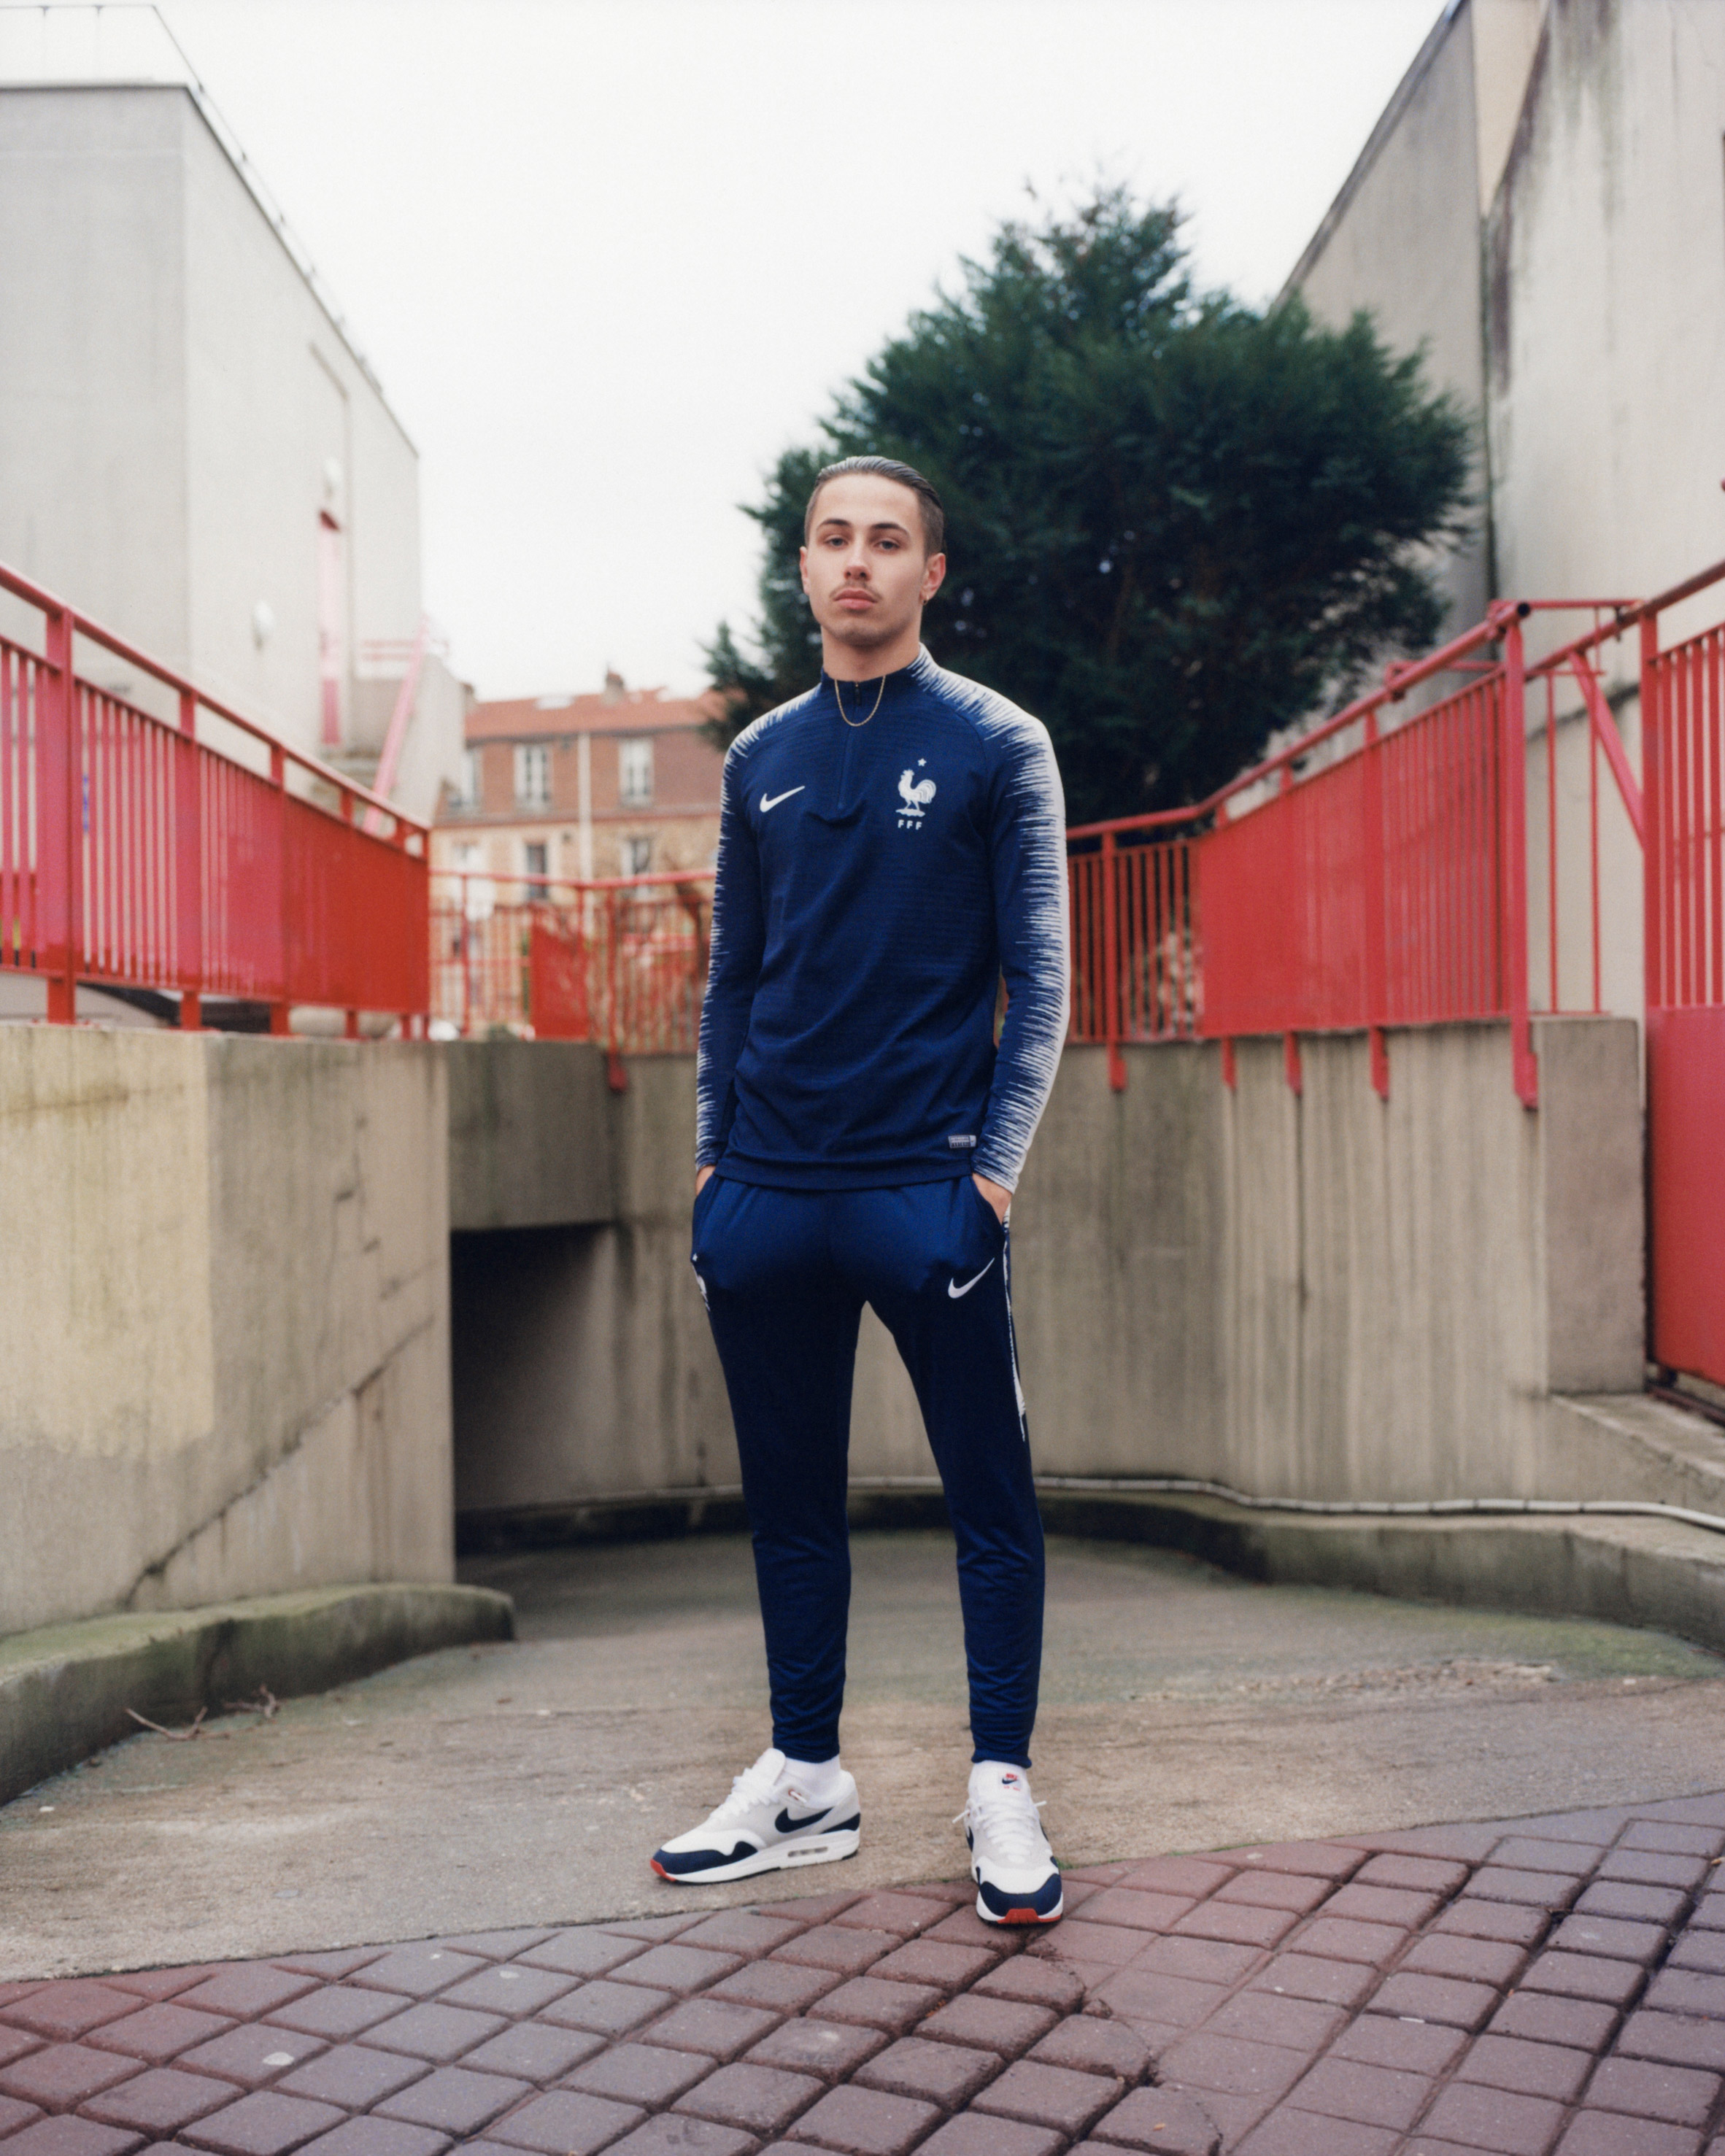 Nike's World Cup 2018 kits for France are to "express patriotism"